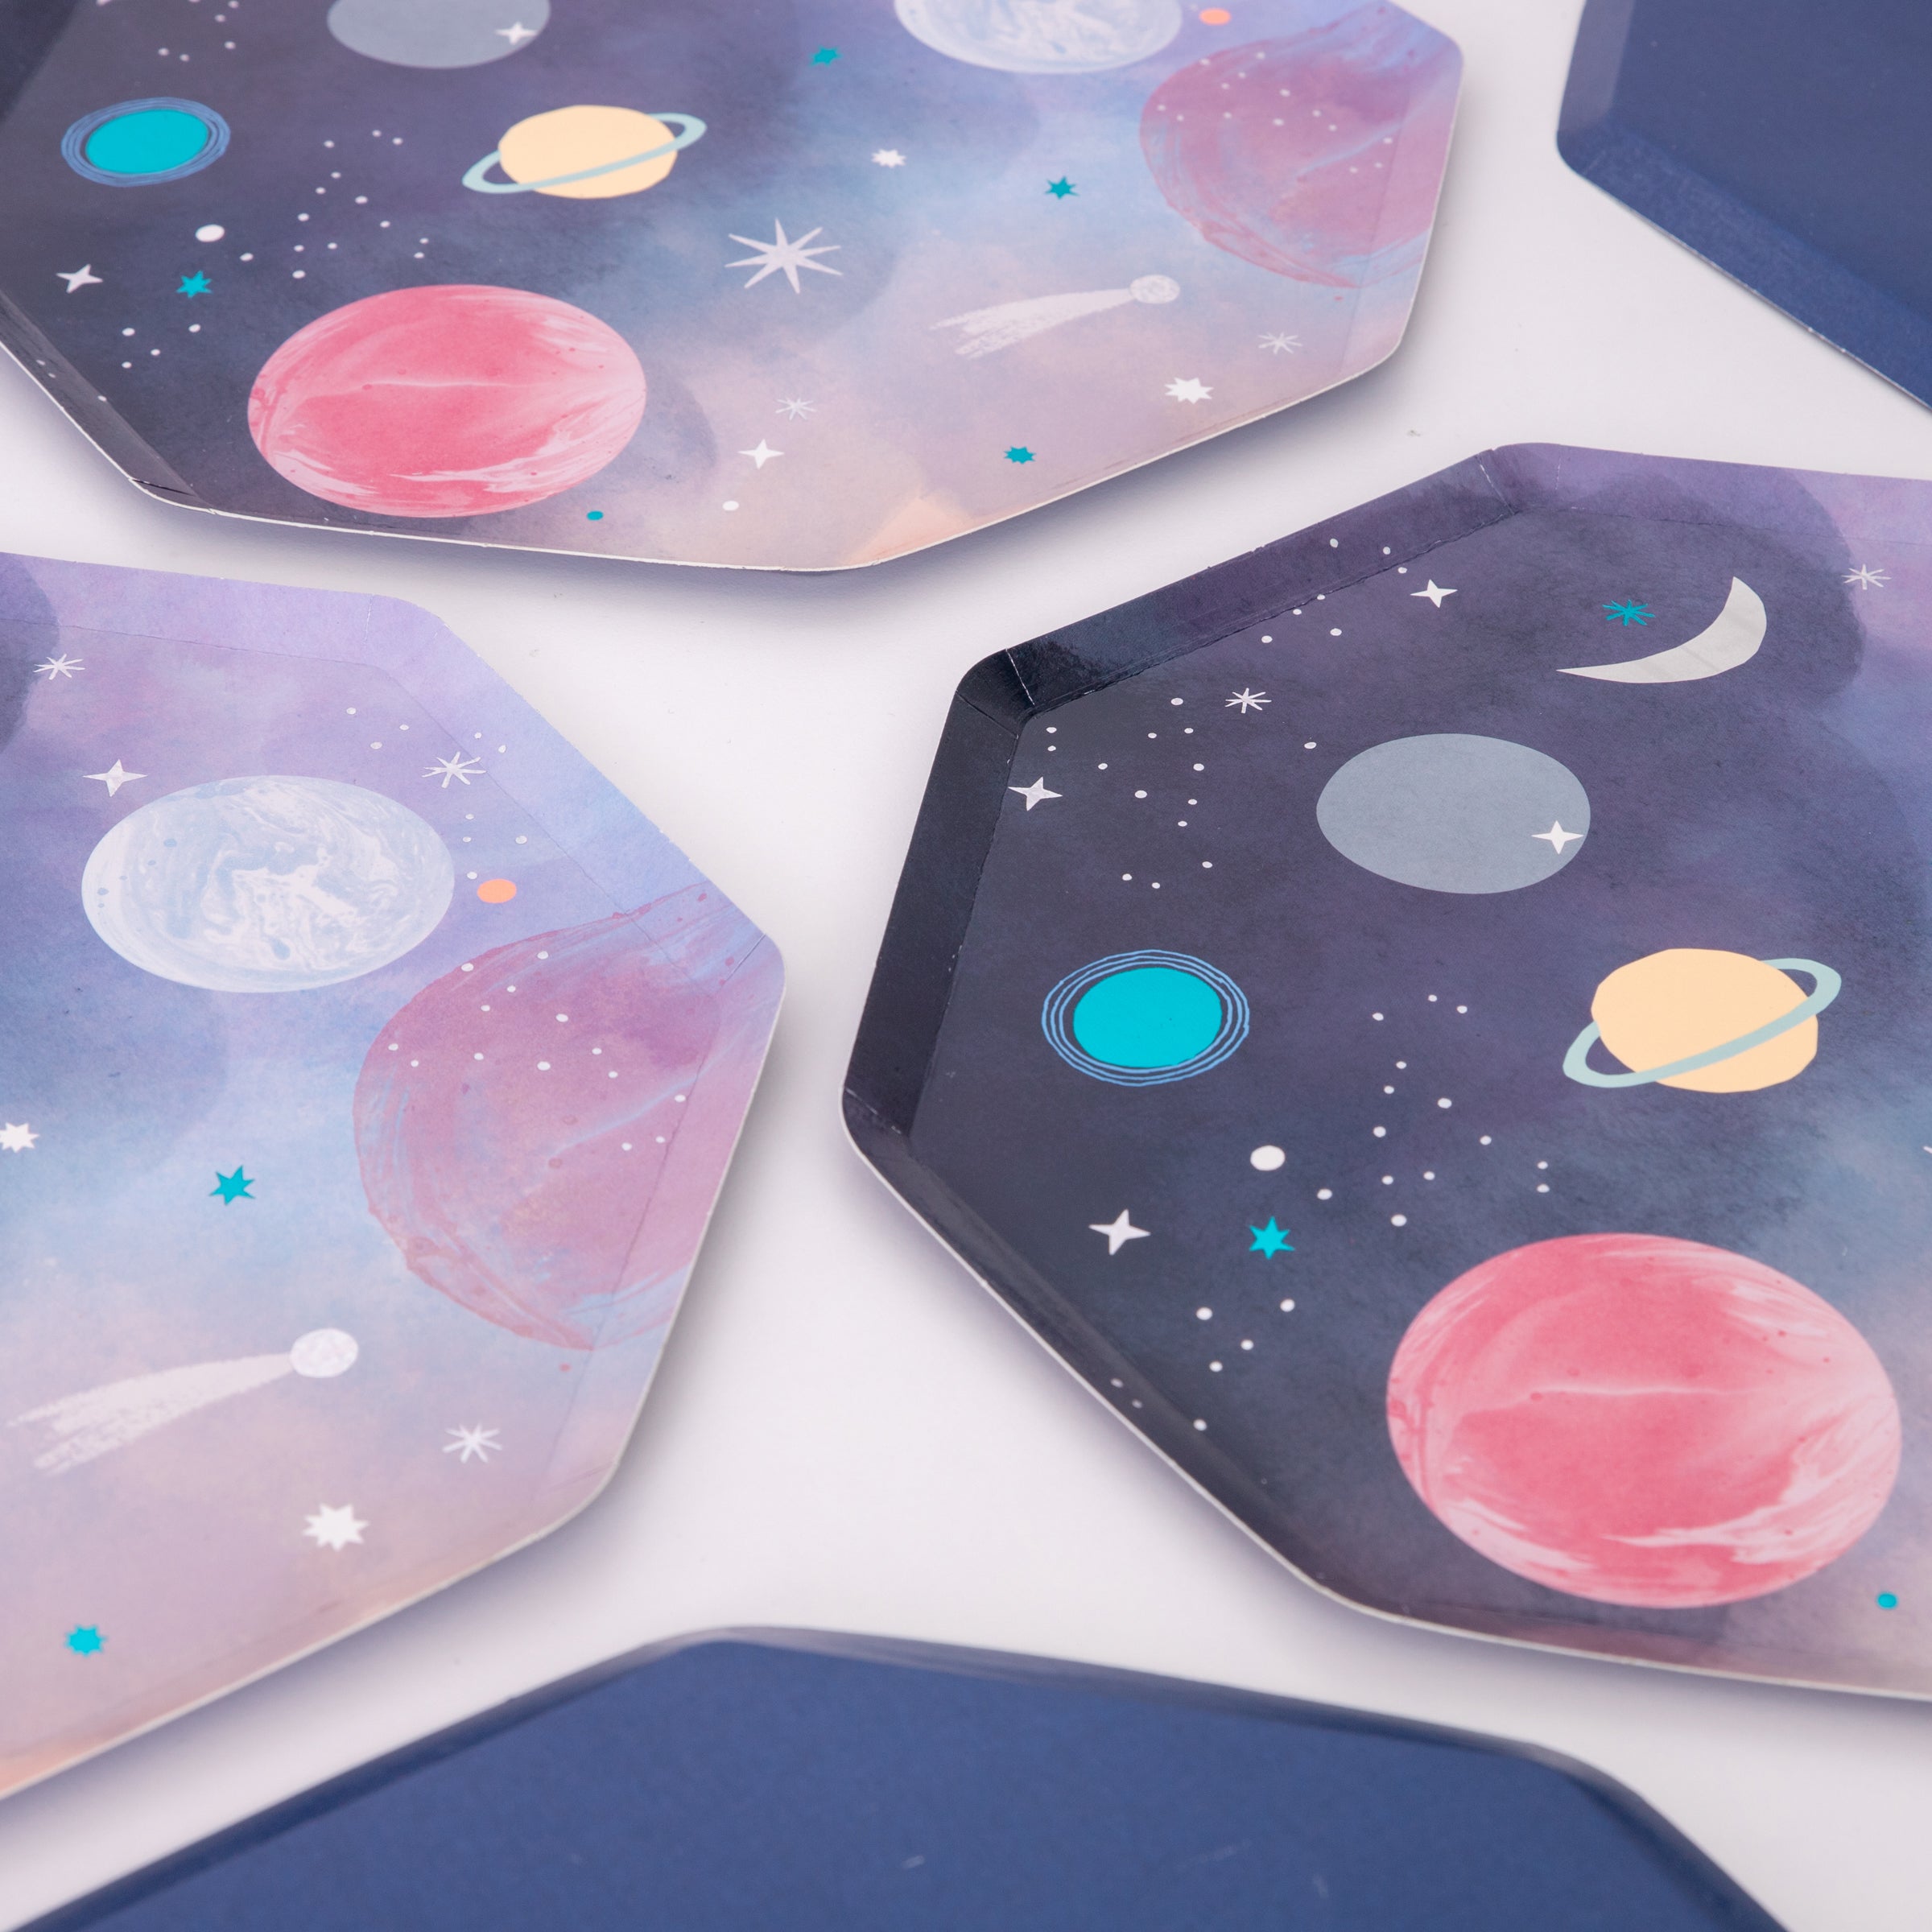 Our paper plates feature brightly coloured planets and stars for an out-of-this world astronaut party.